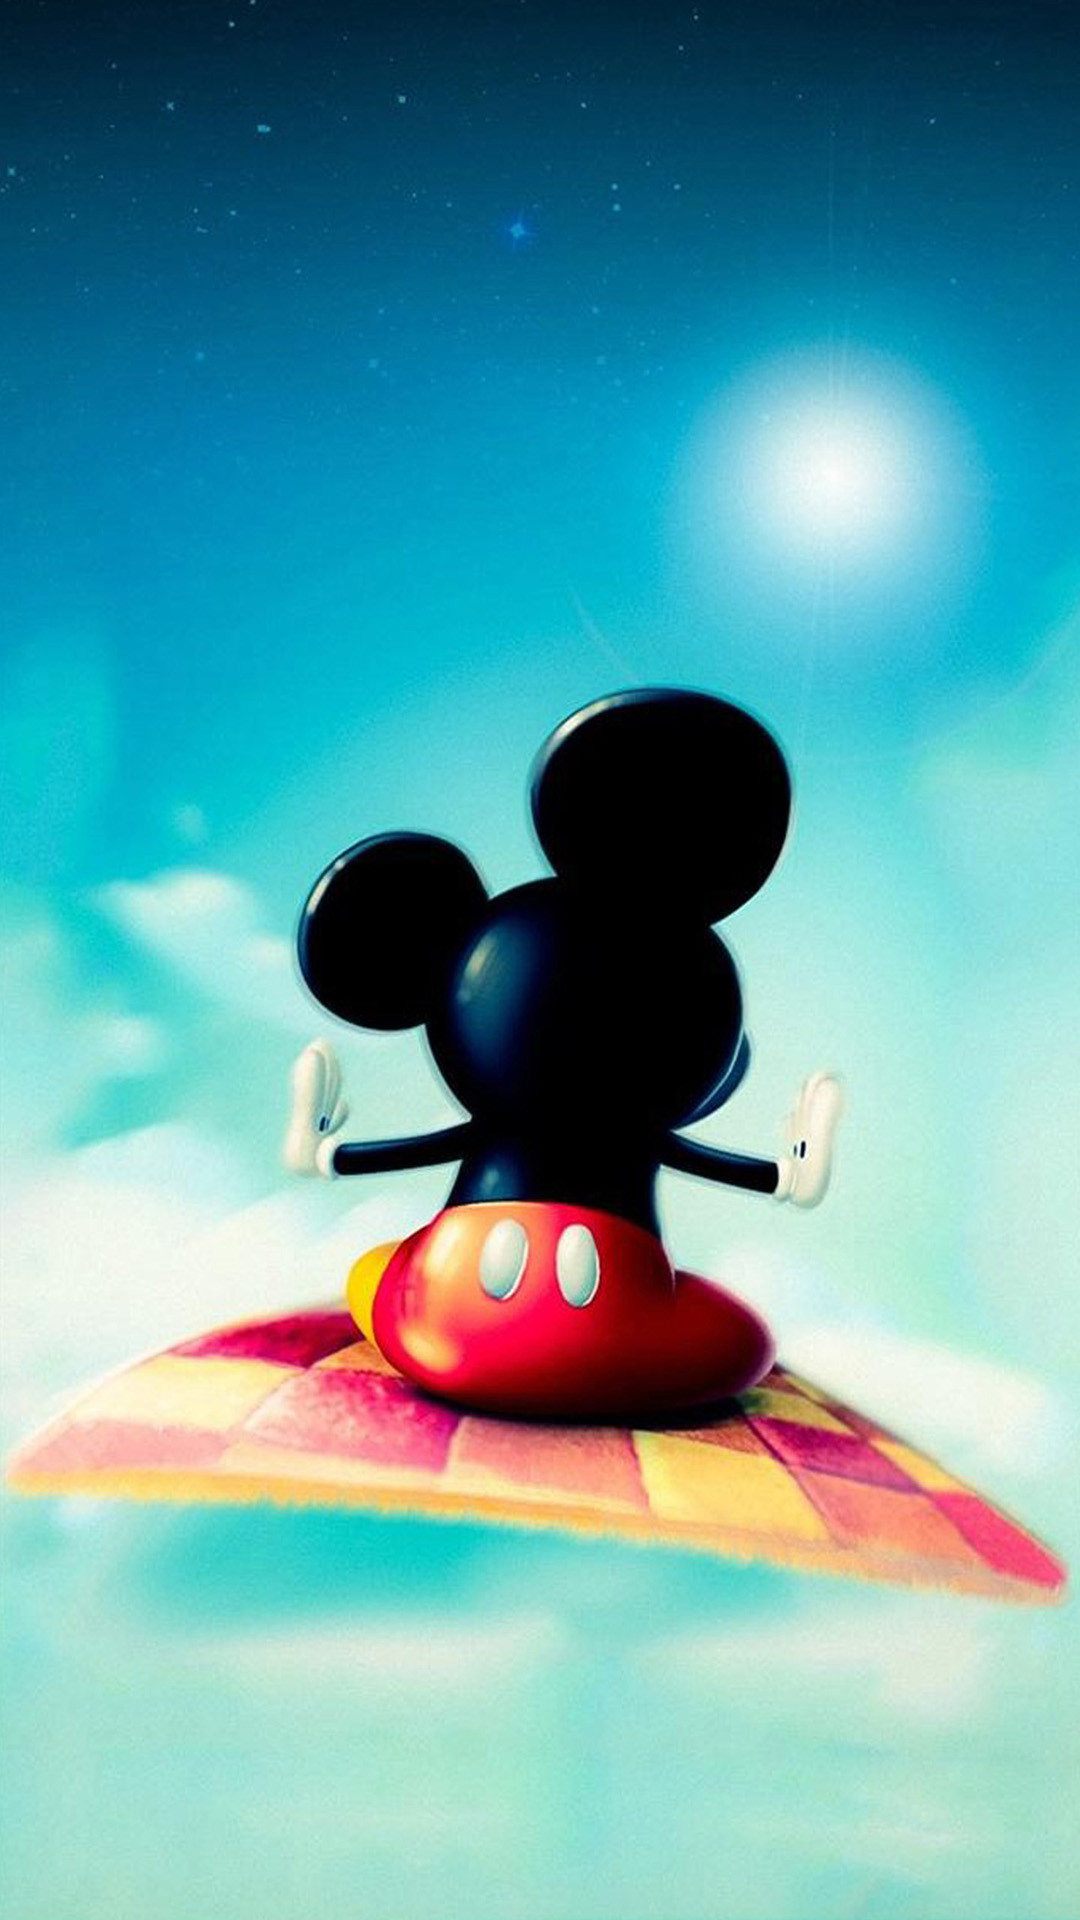 Cute Disney Wallpapers for iPhone